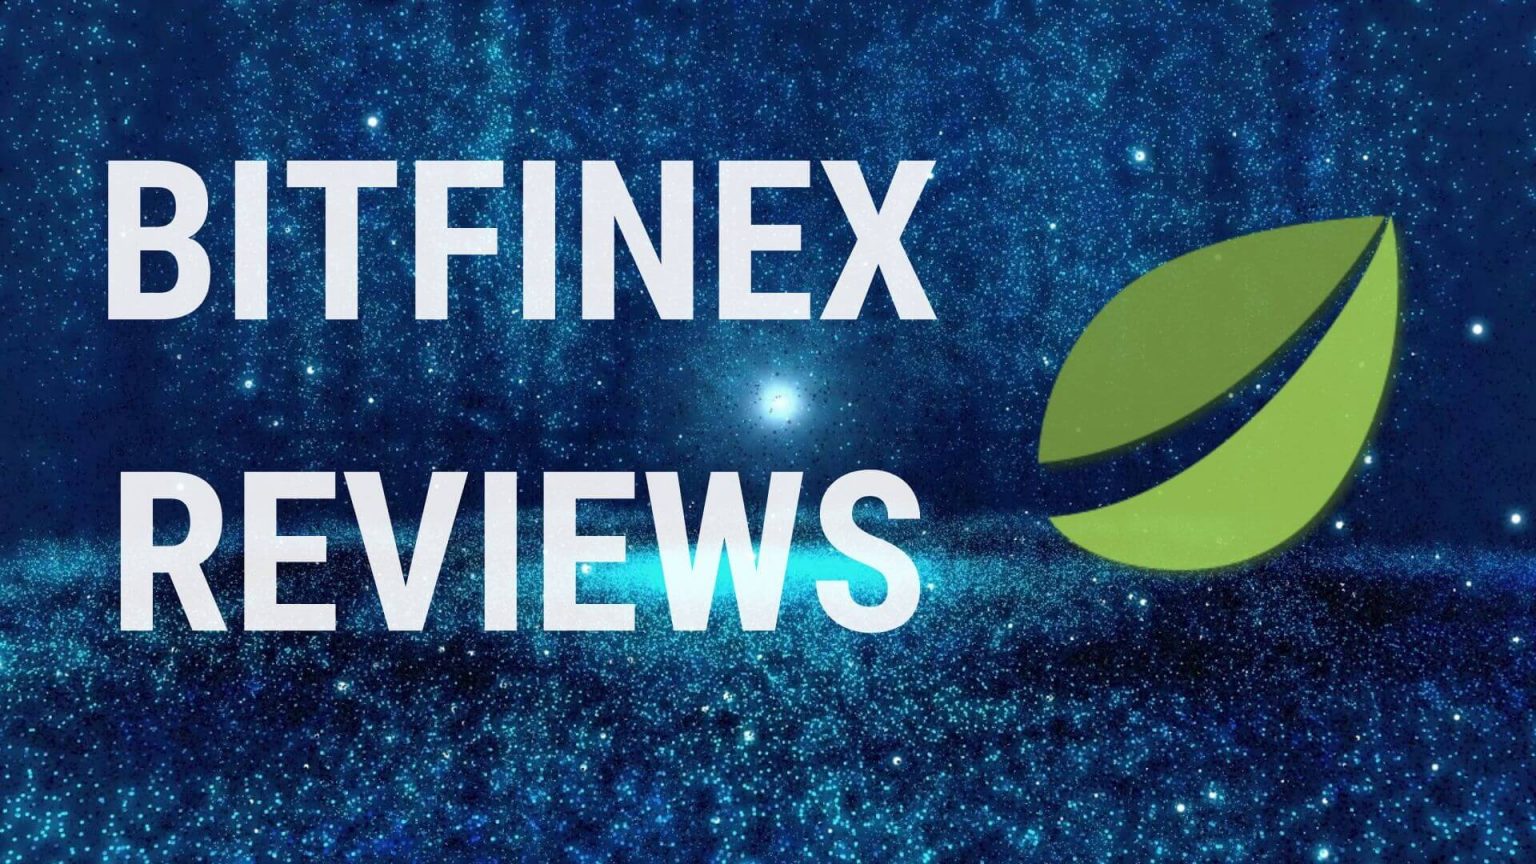 Bitfinex Reviews 2019|Deposit Fees, Withdraw Fees, Trading ...